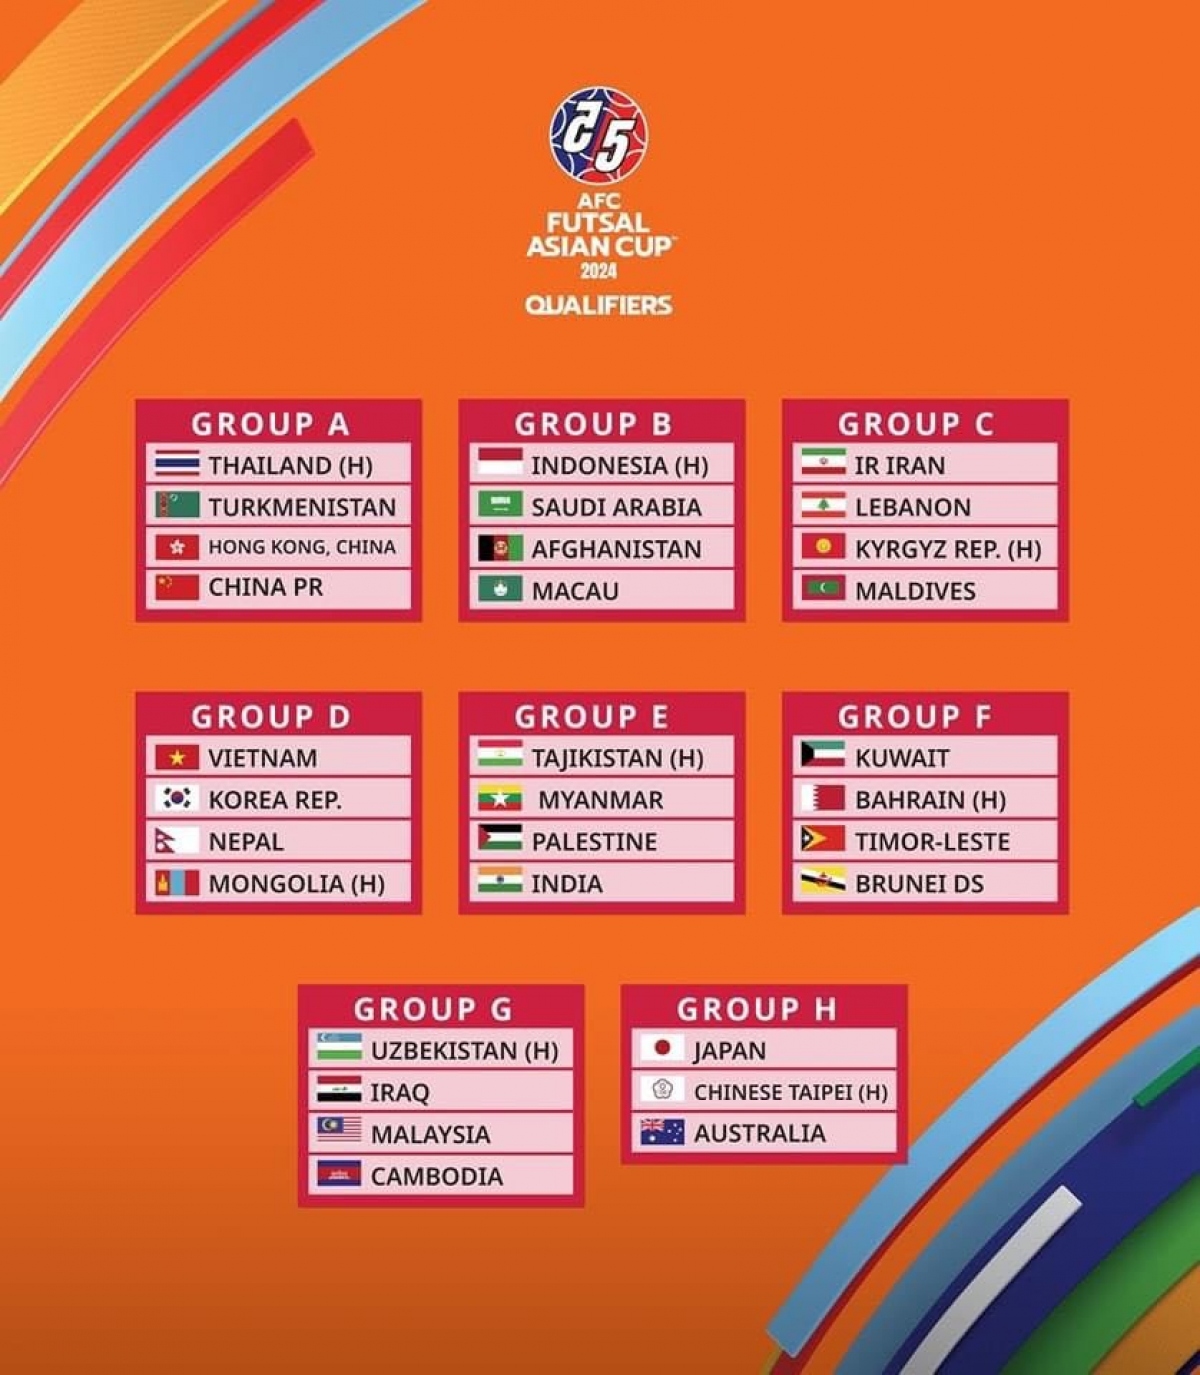 vietnam drawn in group d for futsal asian cup 2024 qualifiers picture 1